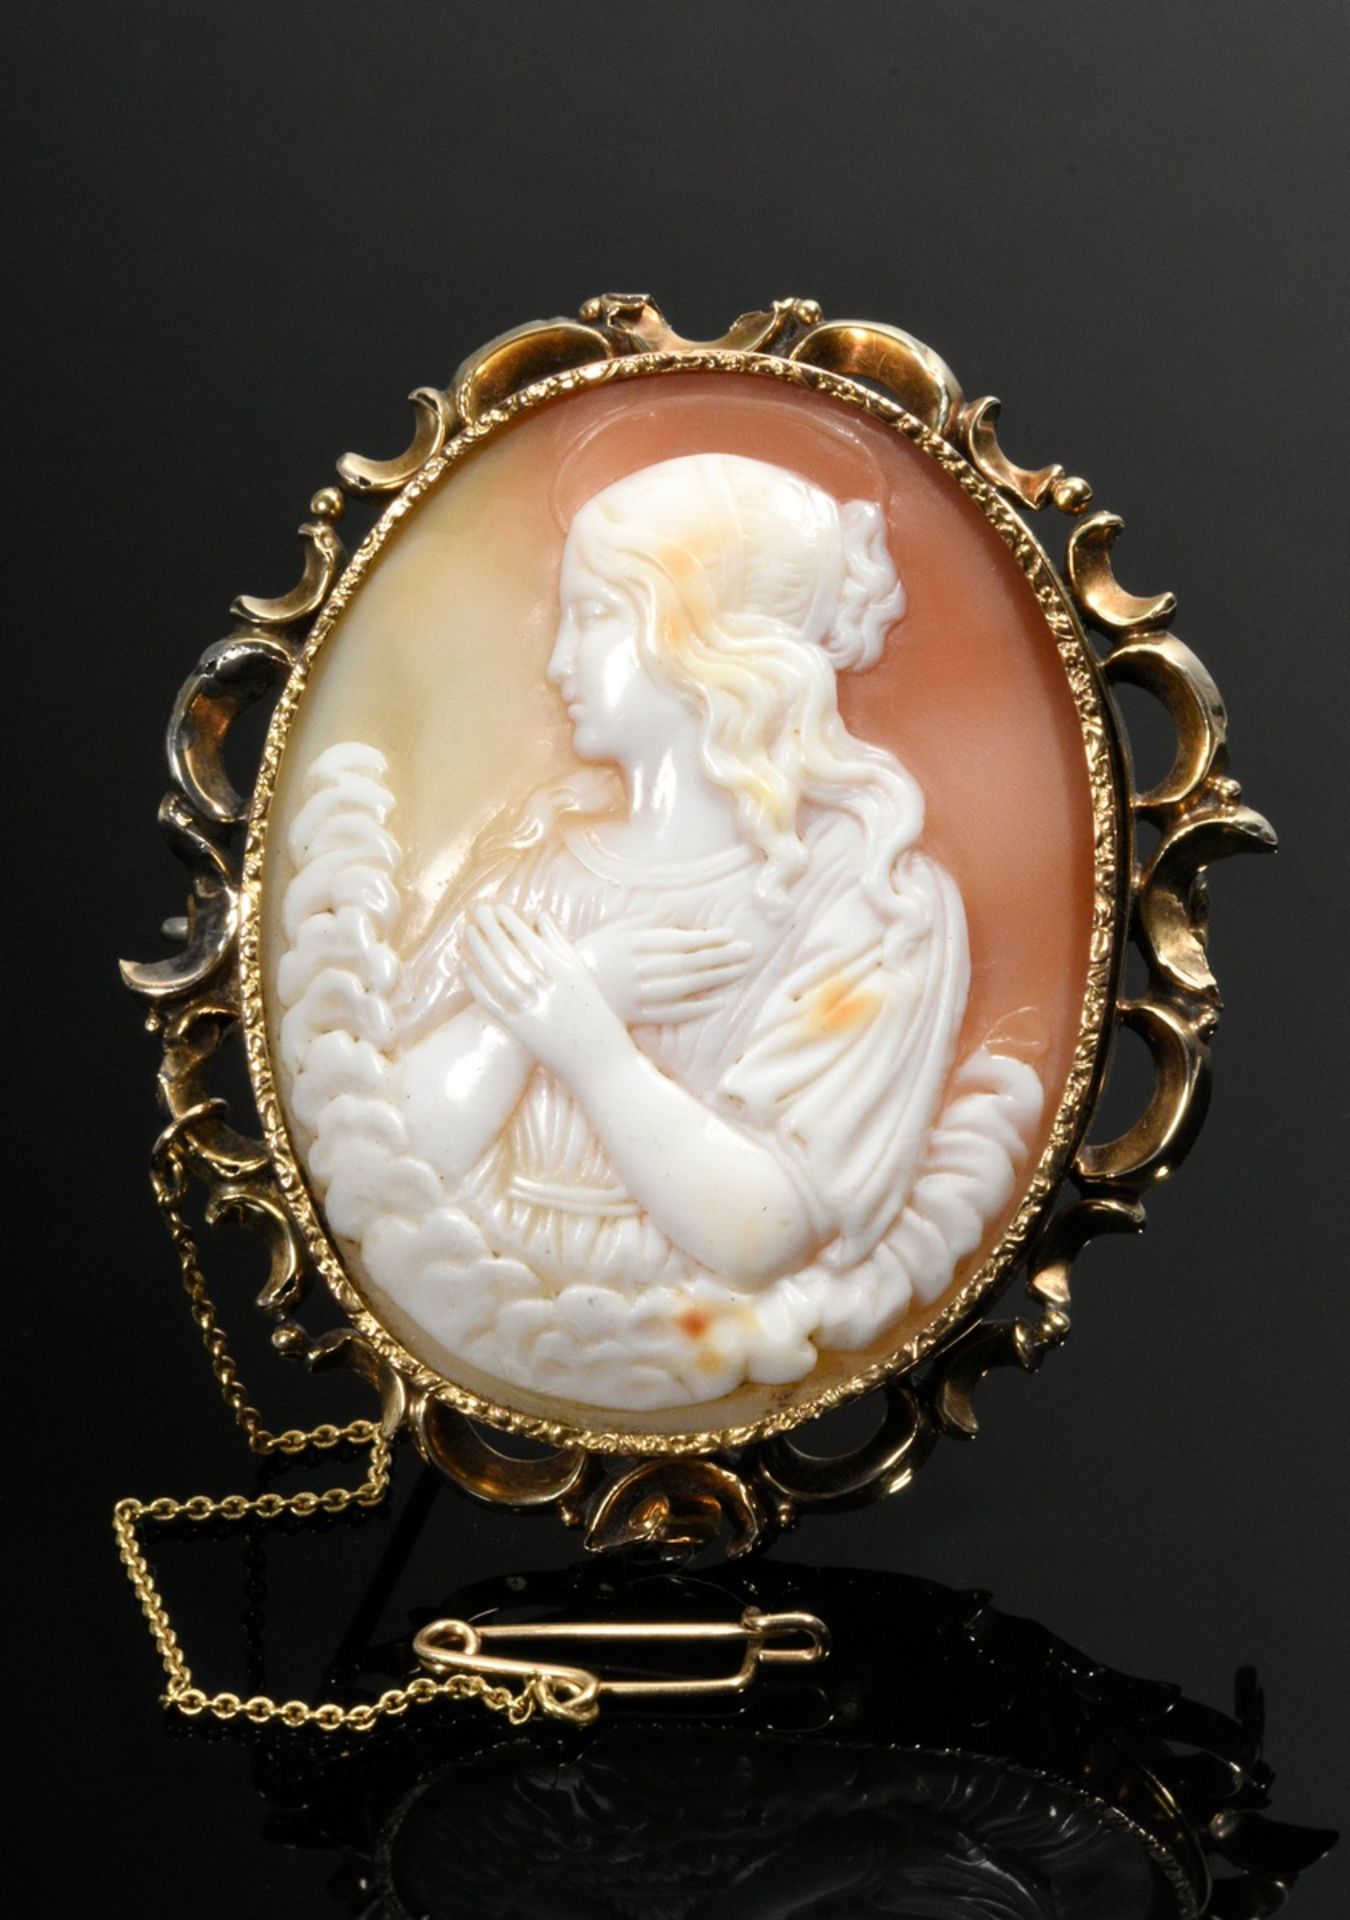 Antique shell cameo needle "Holy Virgin" in rose gold 585 setting, 16.5g, 5.7x4.6cm, verso monogram